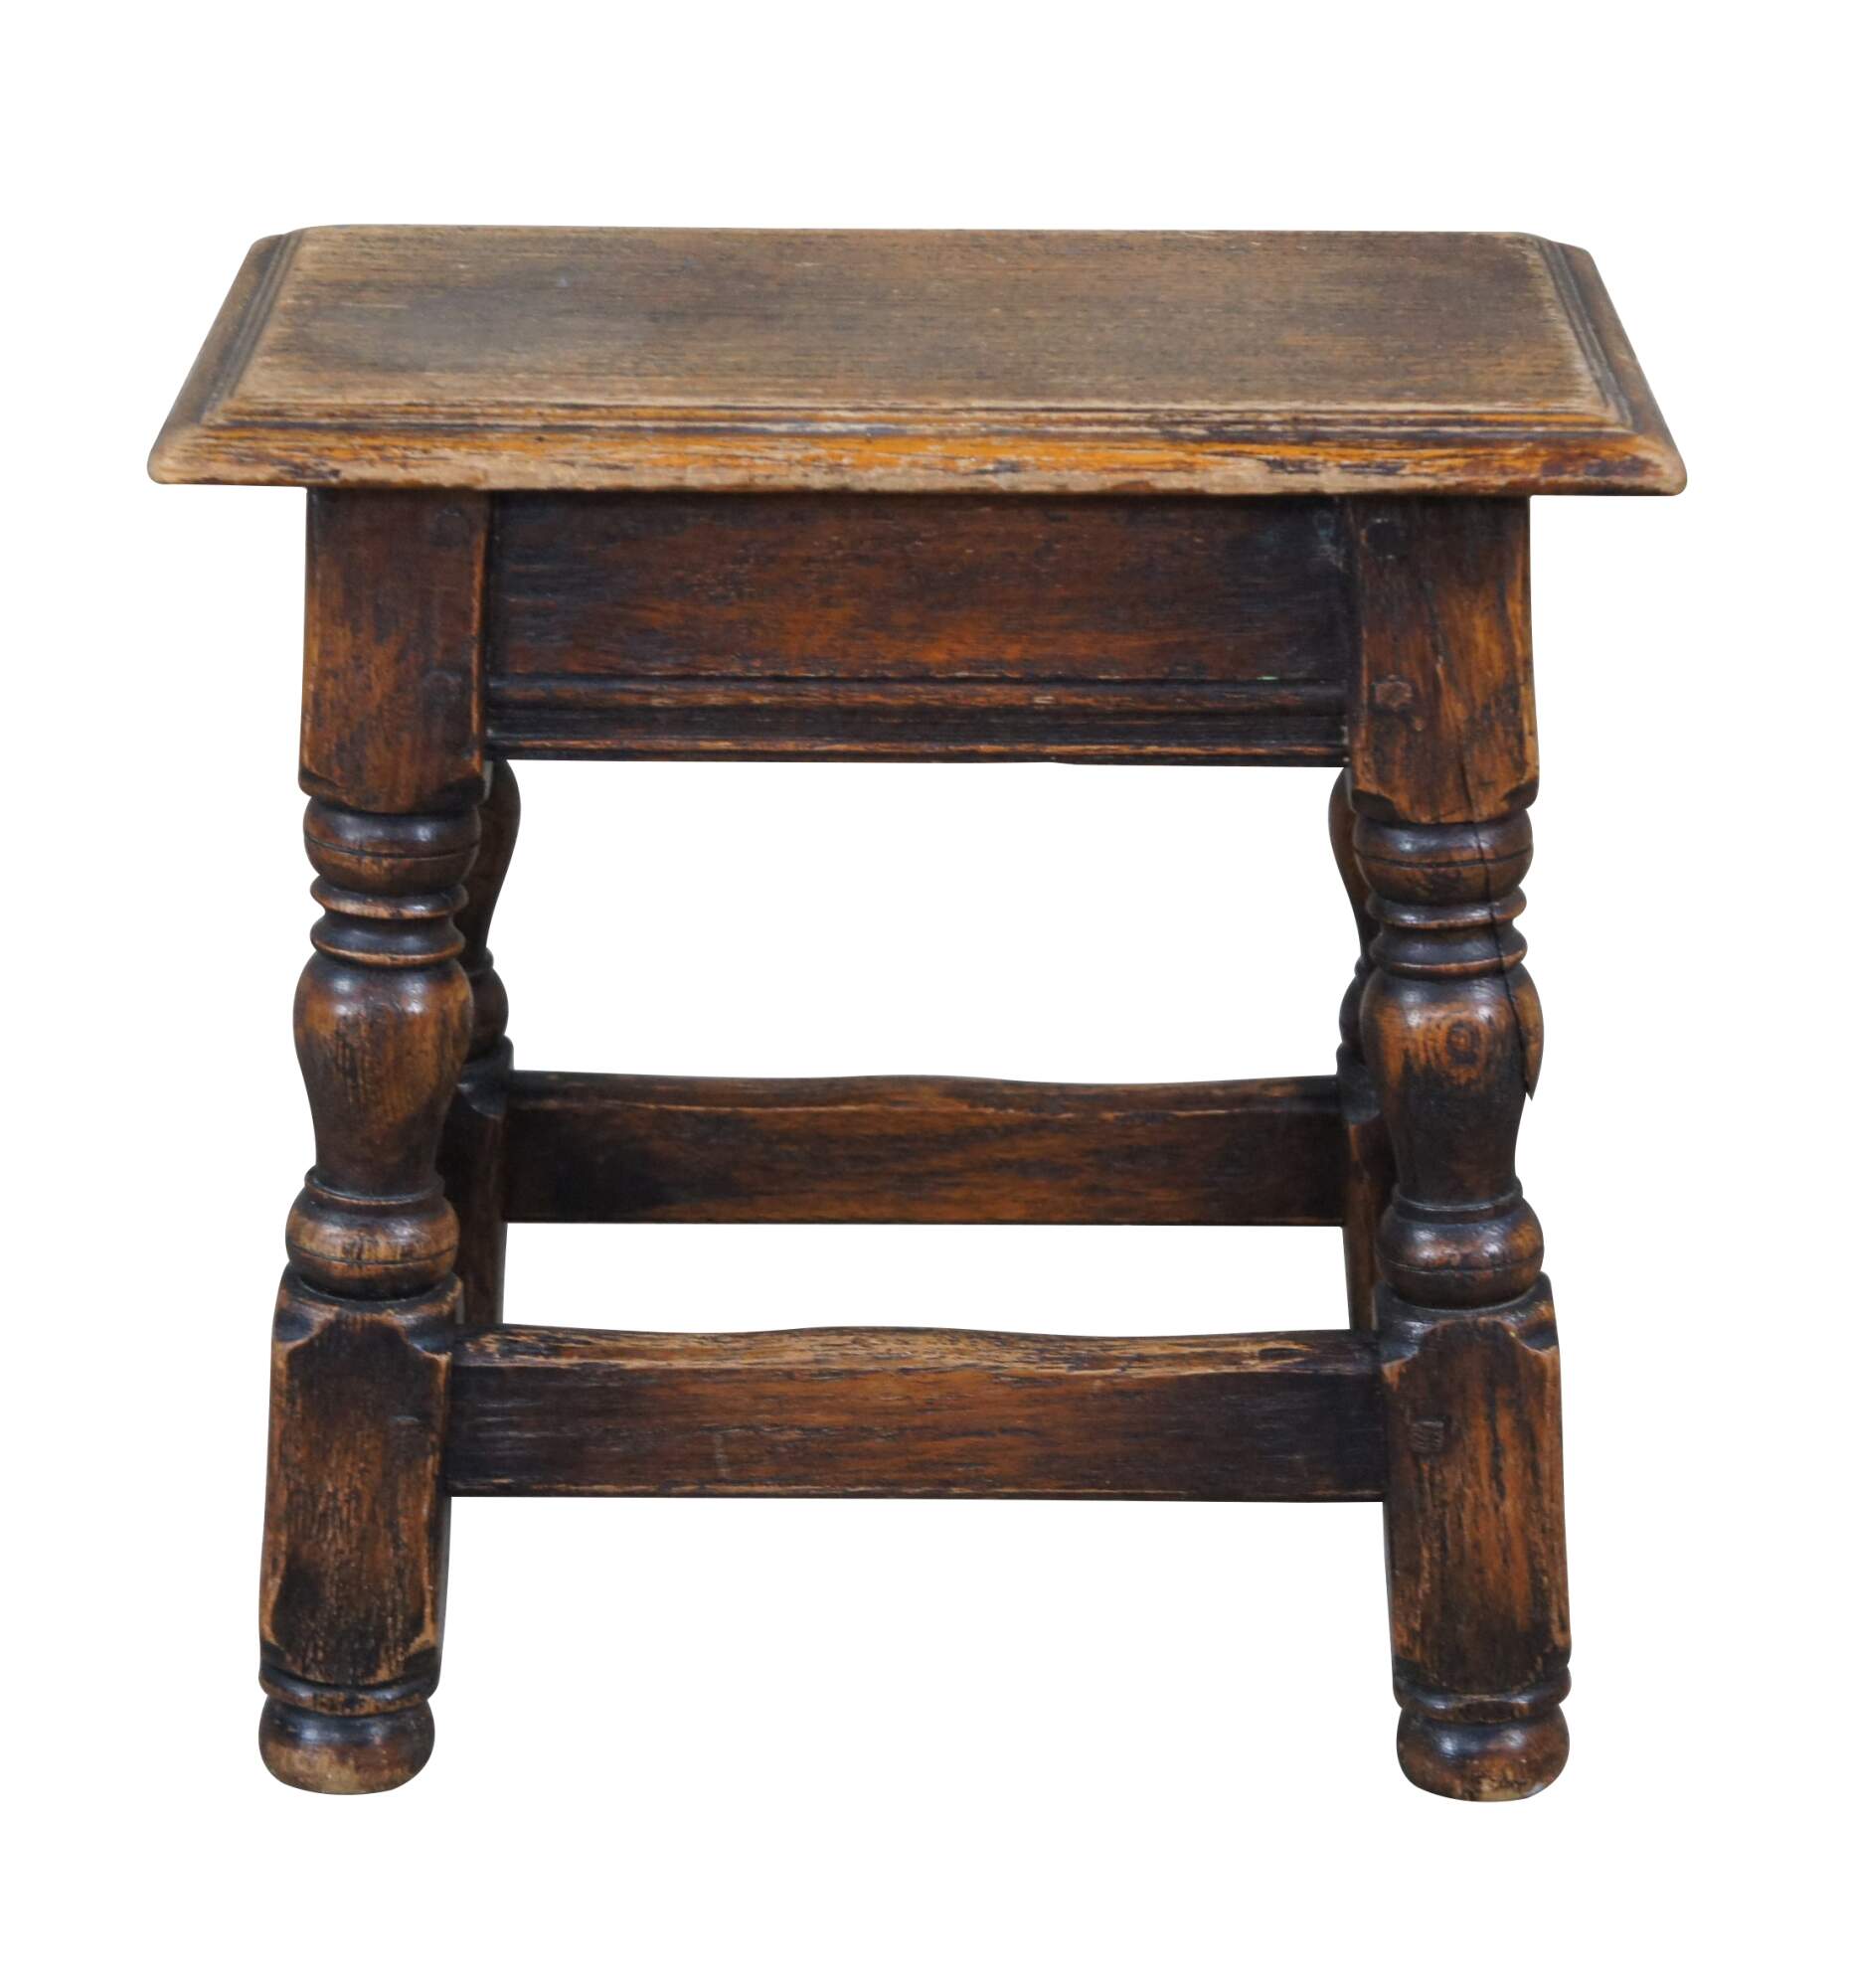 Early 20th Century Antique Wooden Step Stool Table